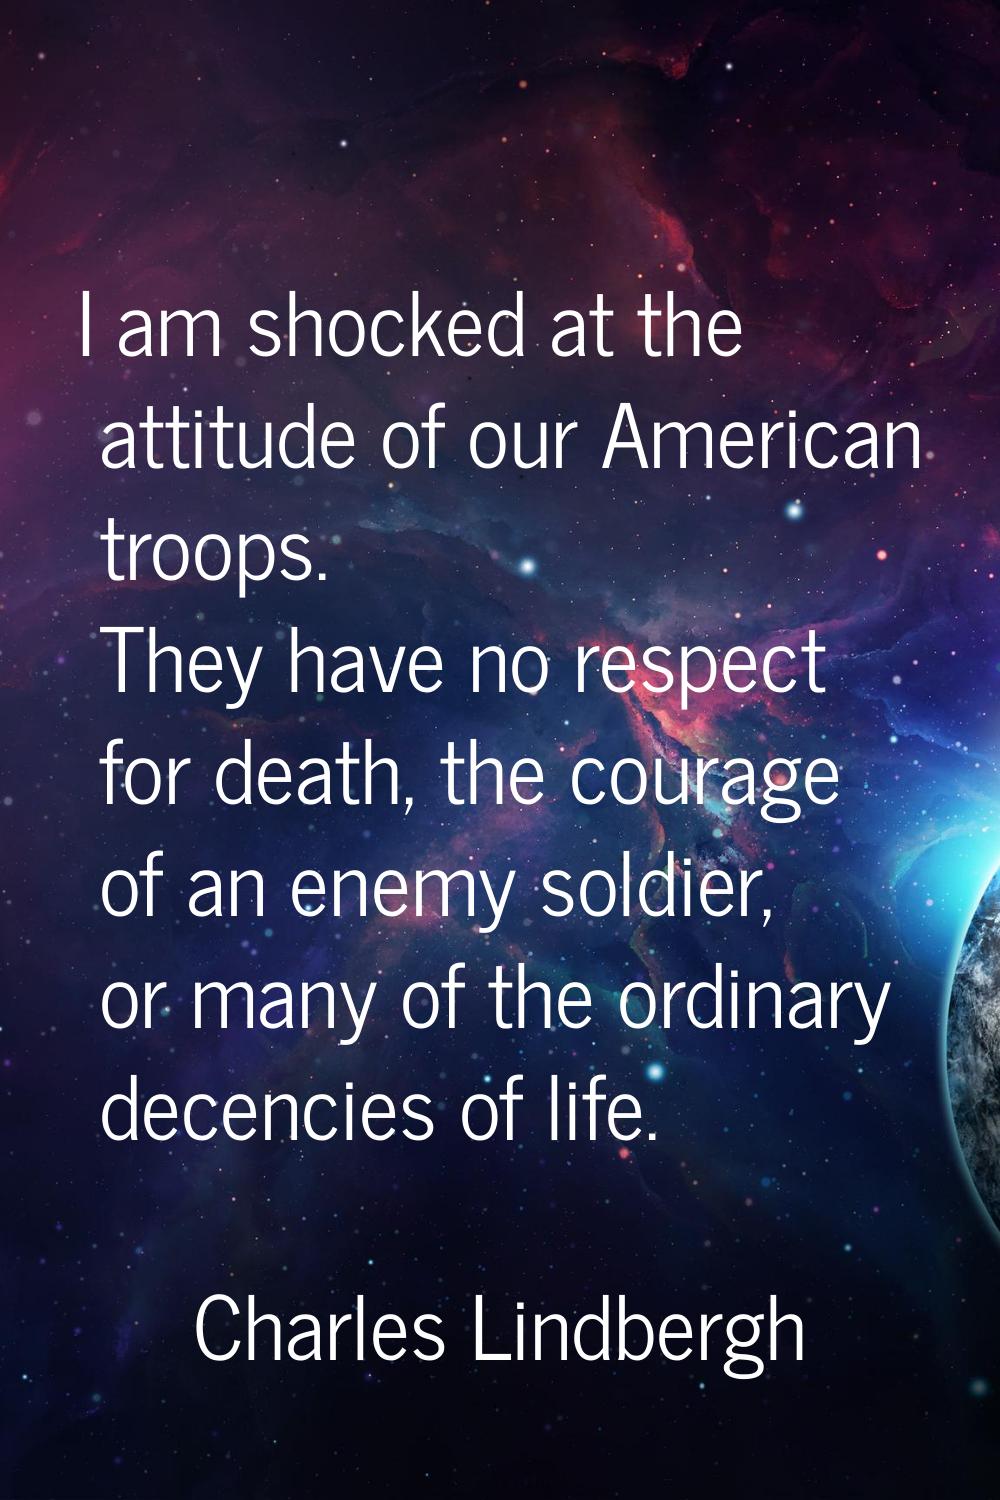 I am shocked at the attitude of our American troops. They have no respect for death, the courage of